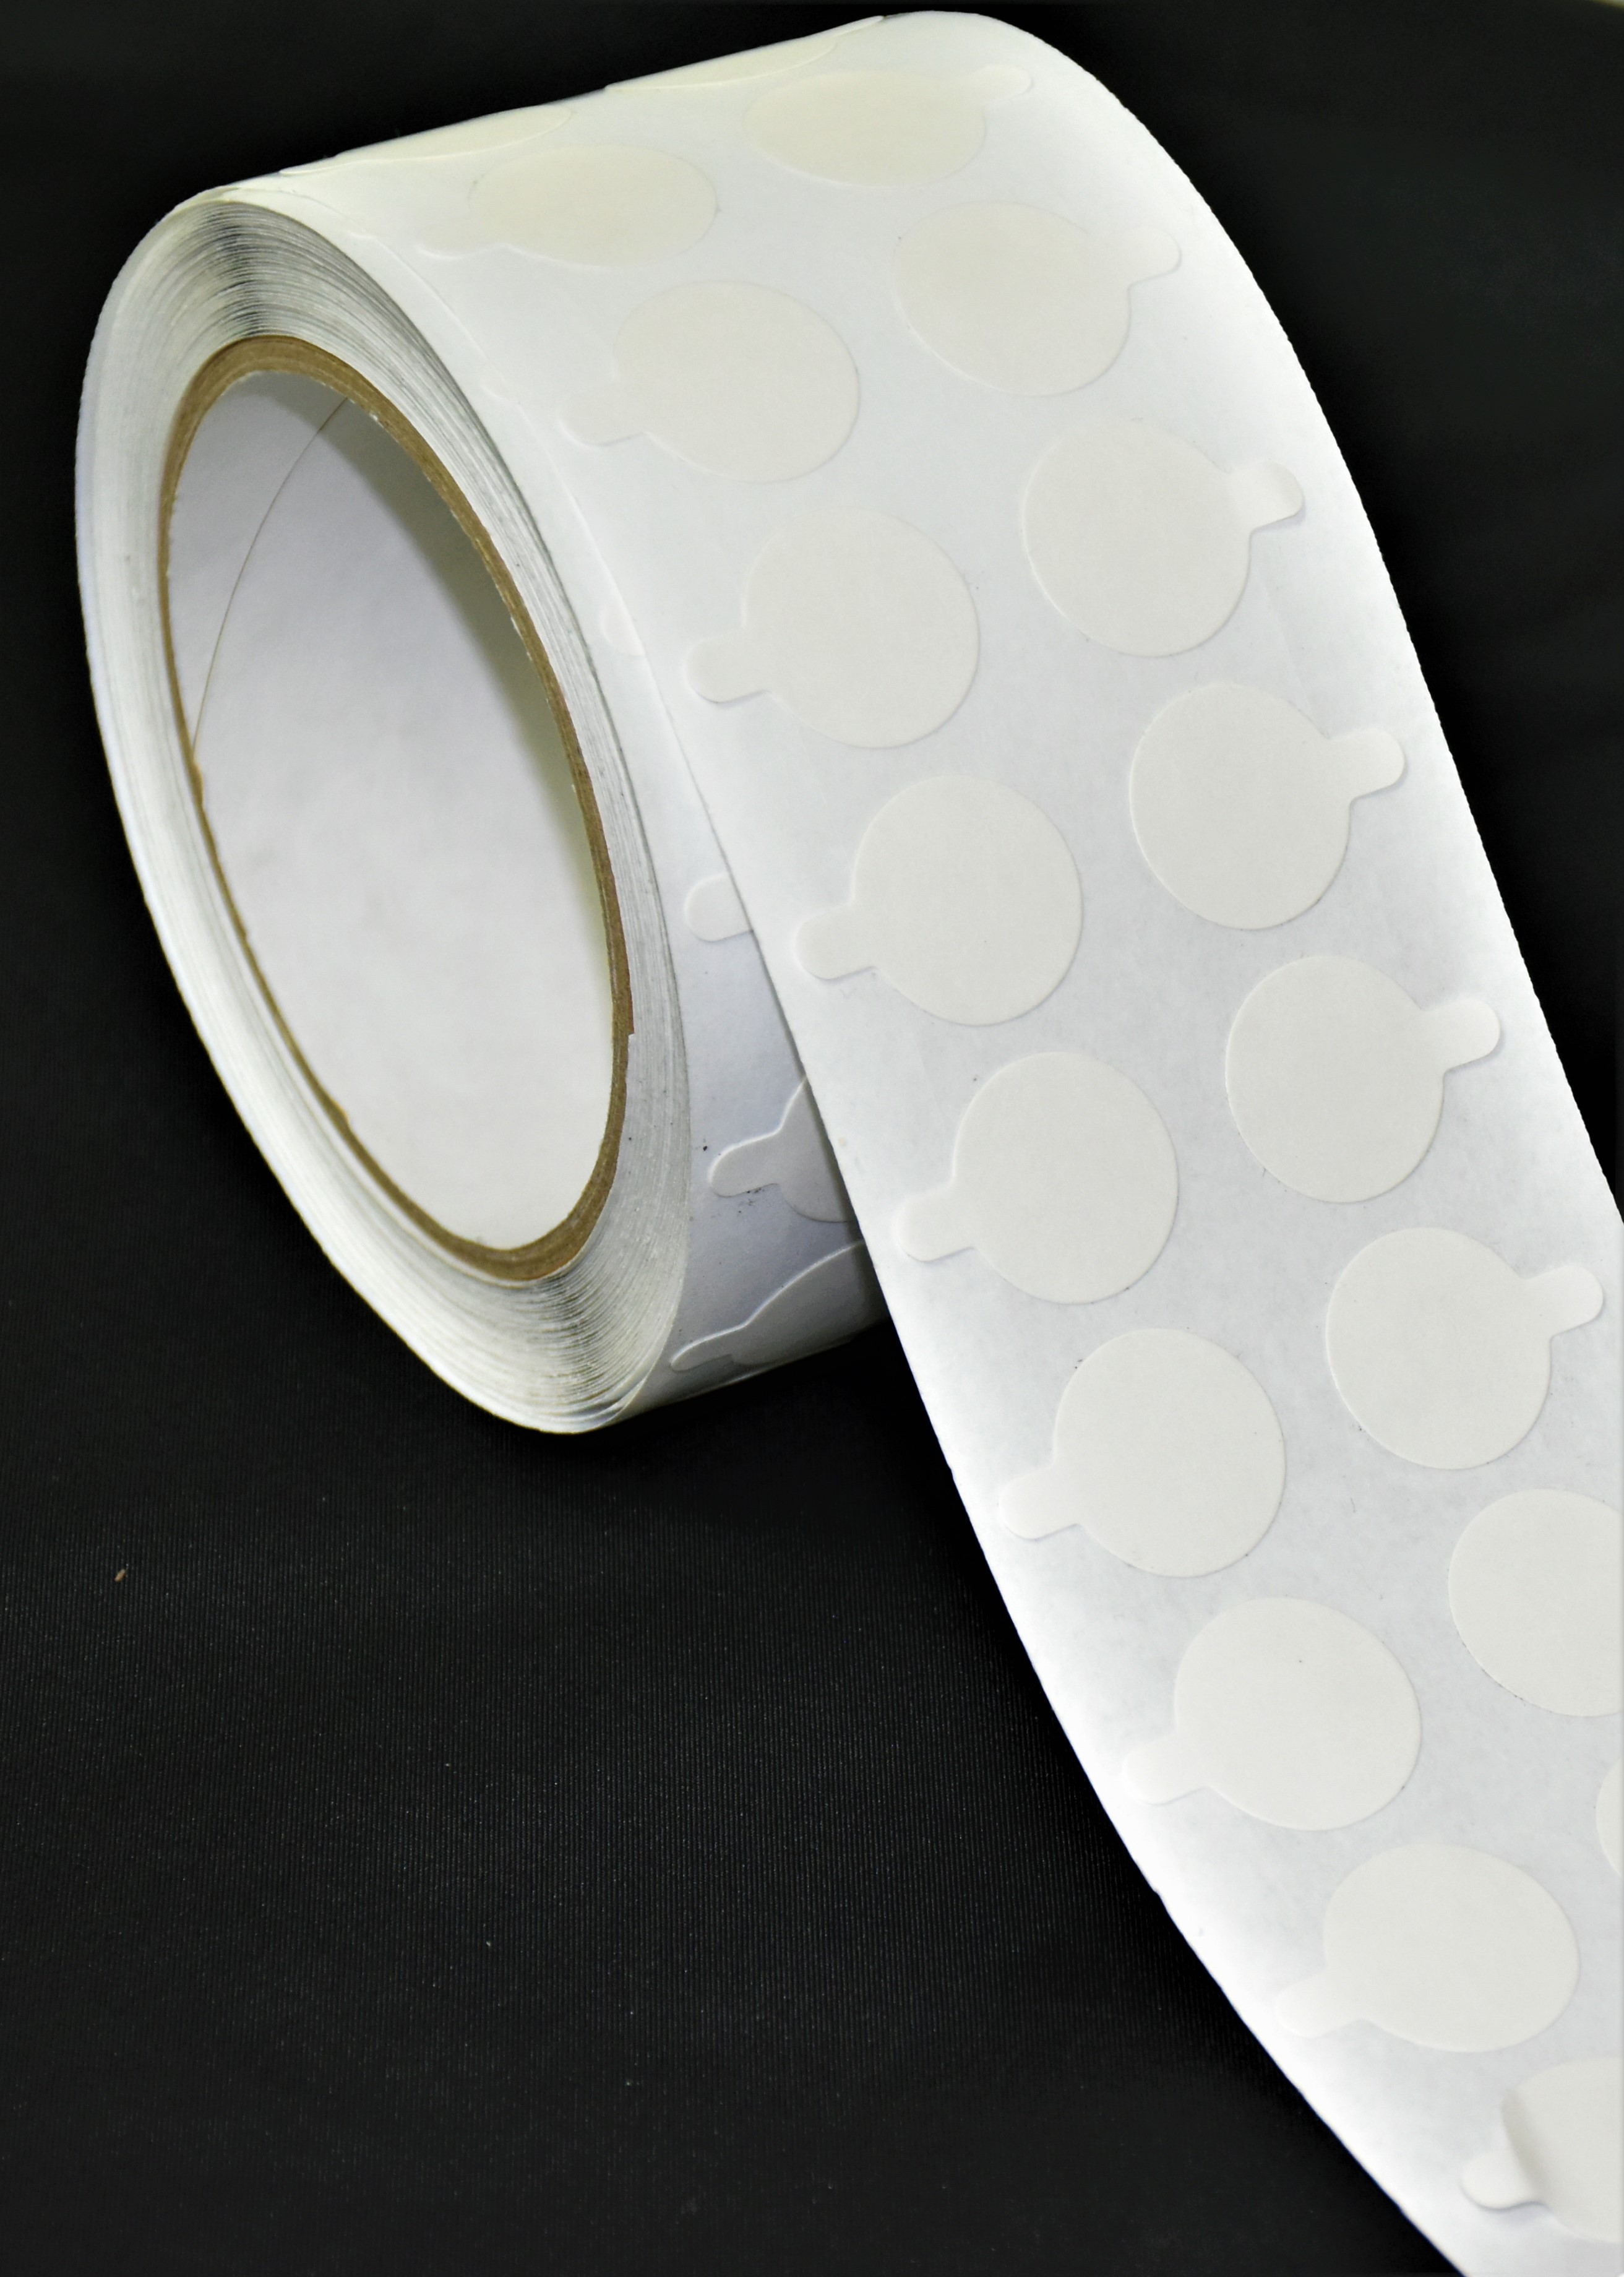 Super Strong Double Sided Adhesive Pads 20MM - Stix2